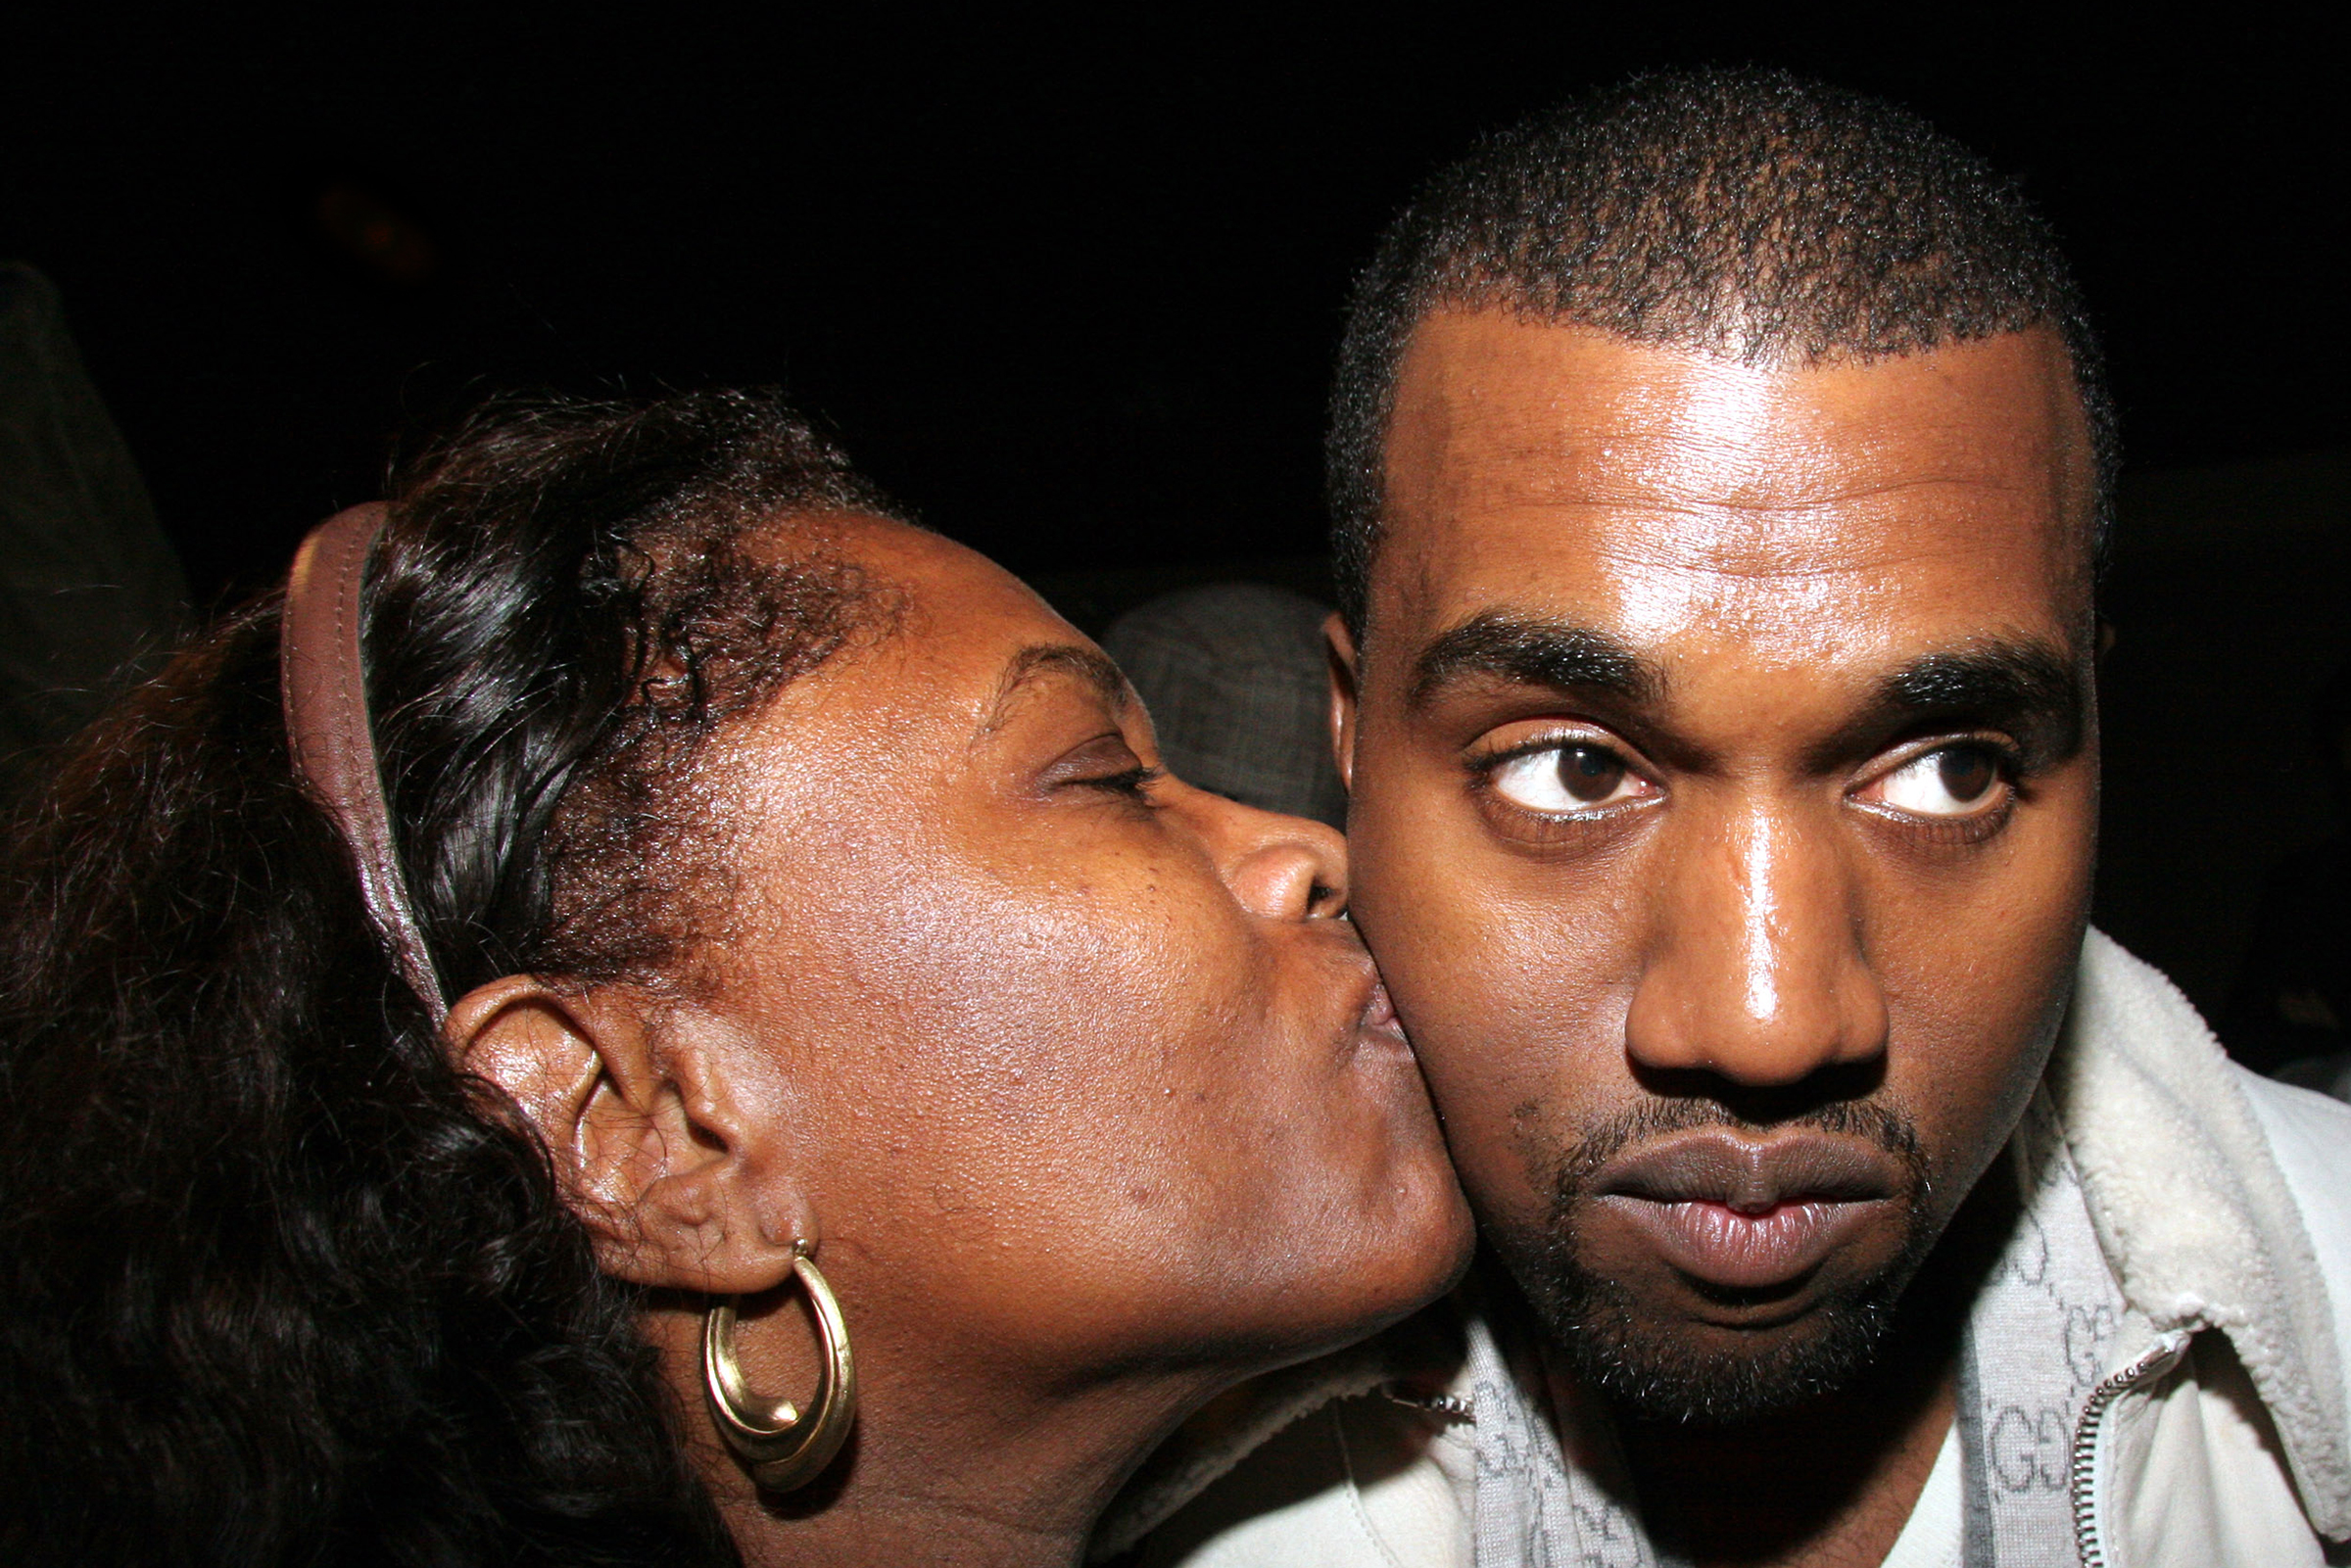 West with his mother Donda (left) in 2005 in New York. (Johnny Nunez—WireImage/Getty Images)